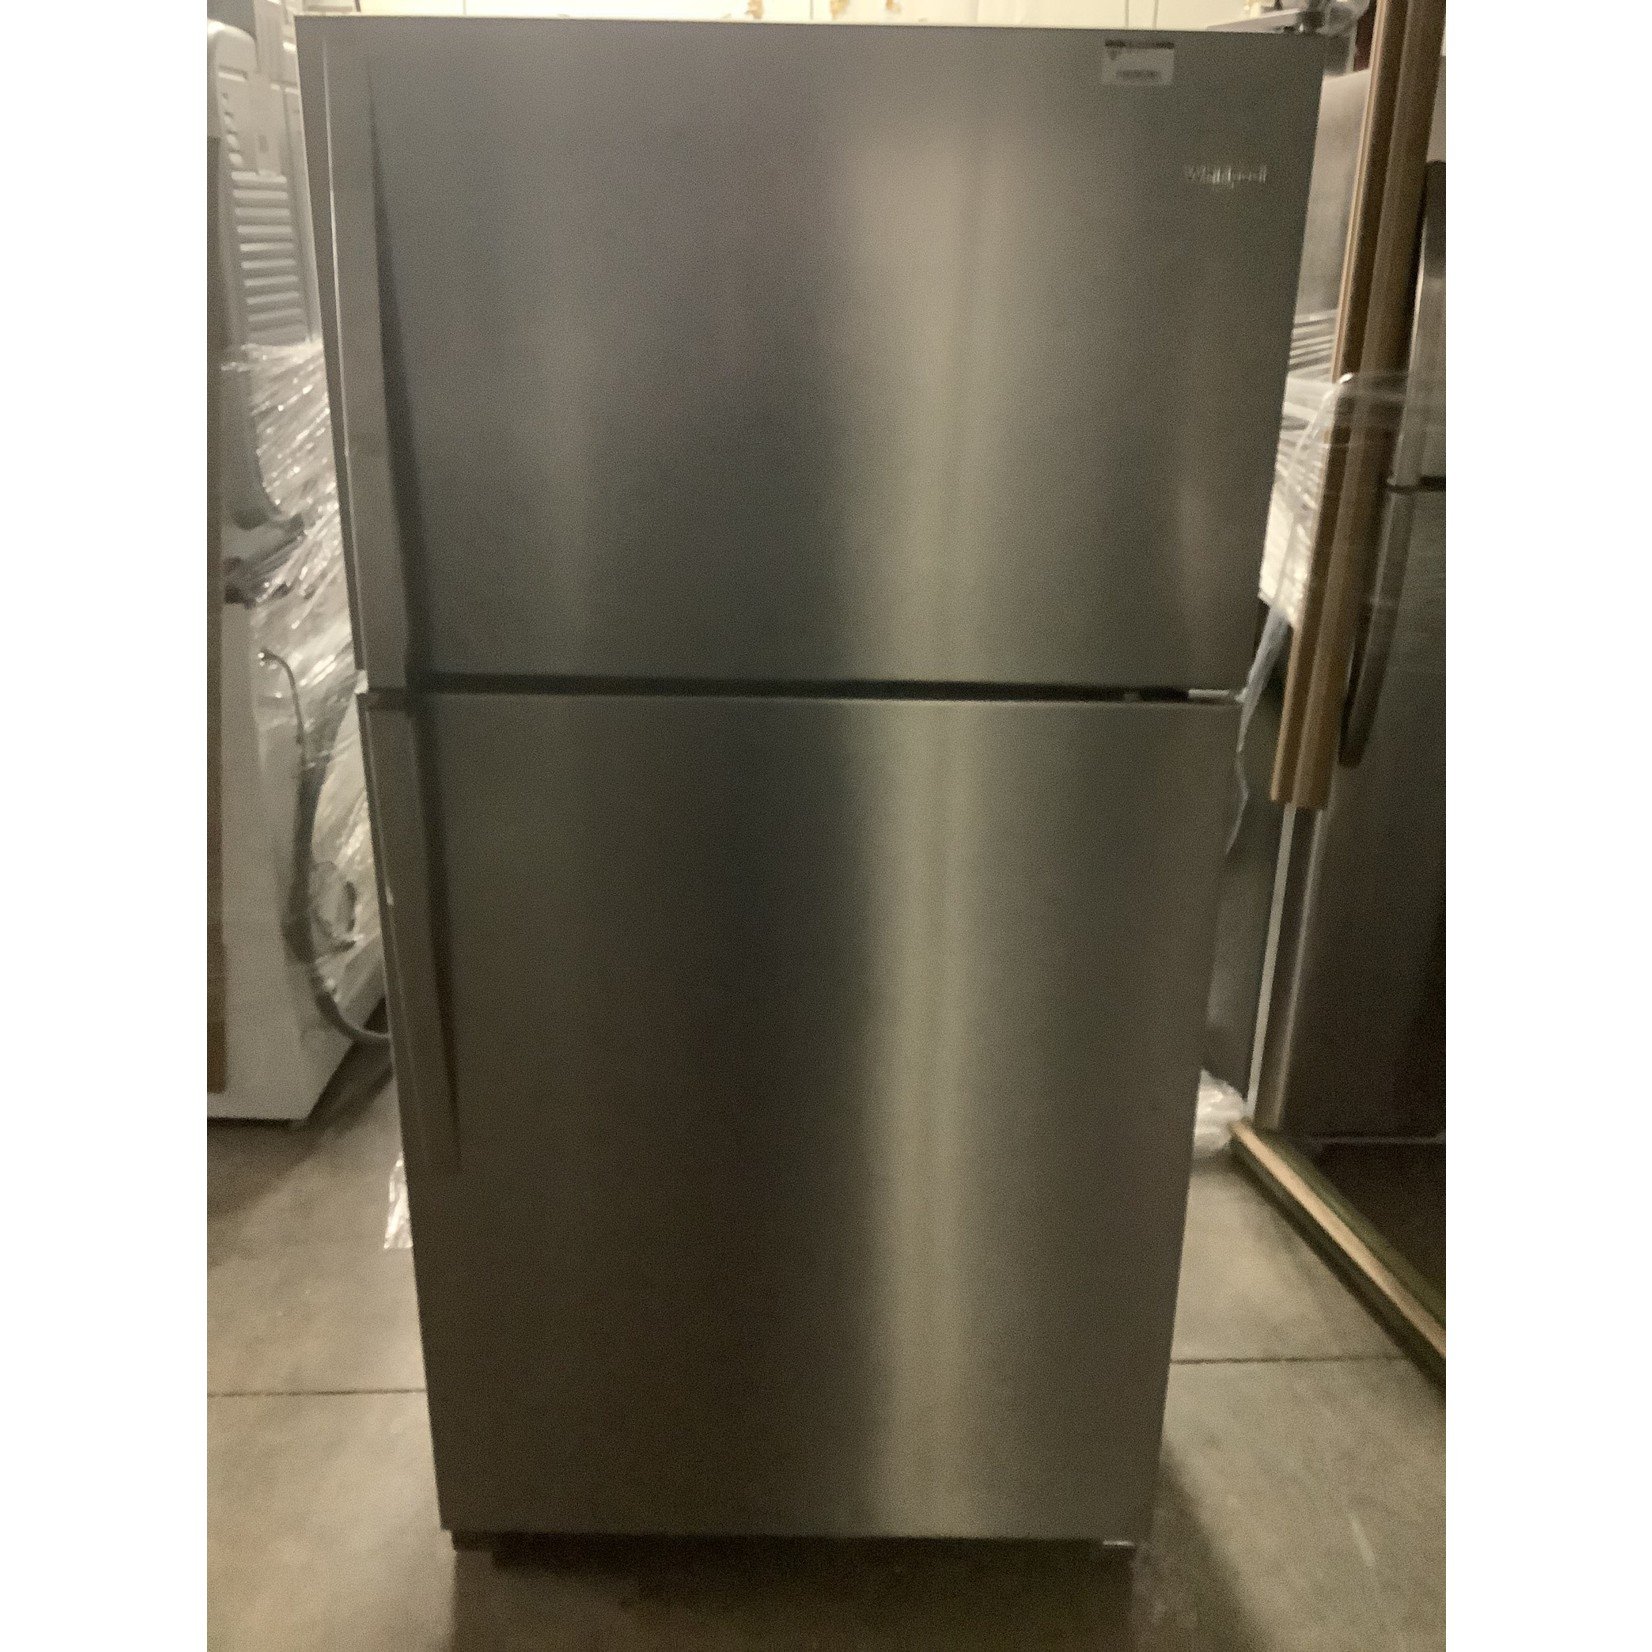 WHIRLPOOL FRENCH DOOR STAINLESS Refrigerator